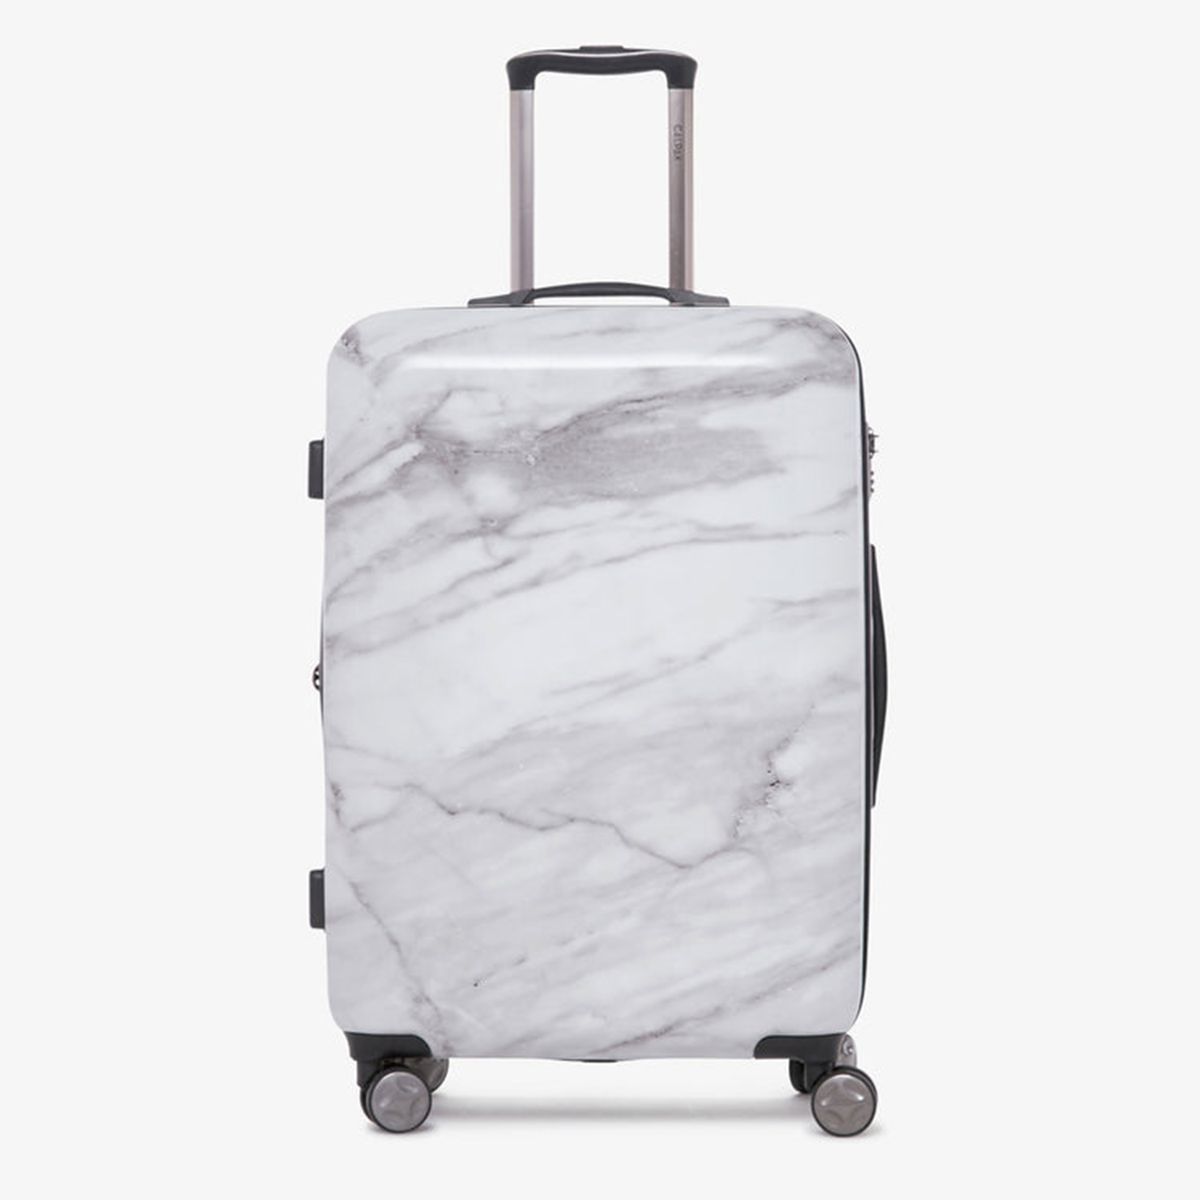 presidents' day luggage sales